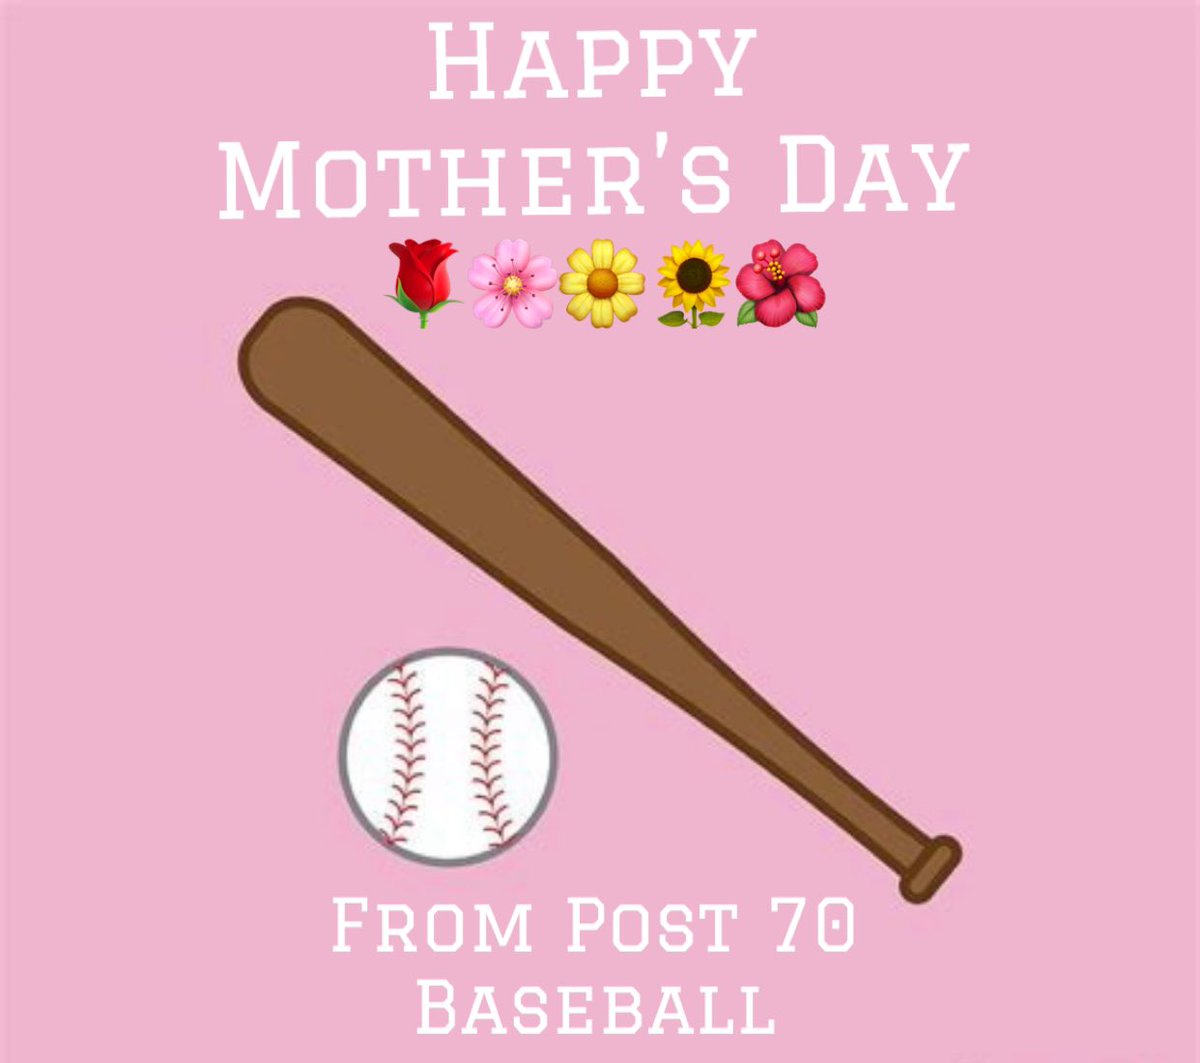 Happy Mother’s Day to all of our baseball moms! #OurBrand | #70boys